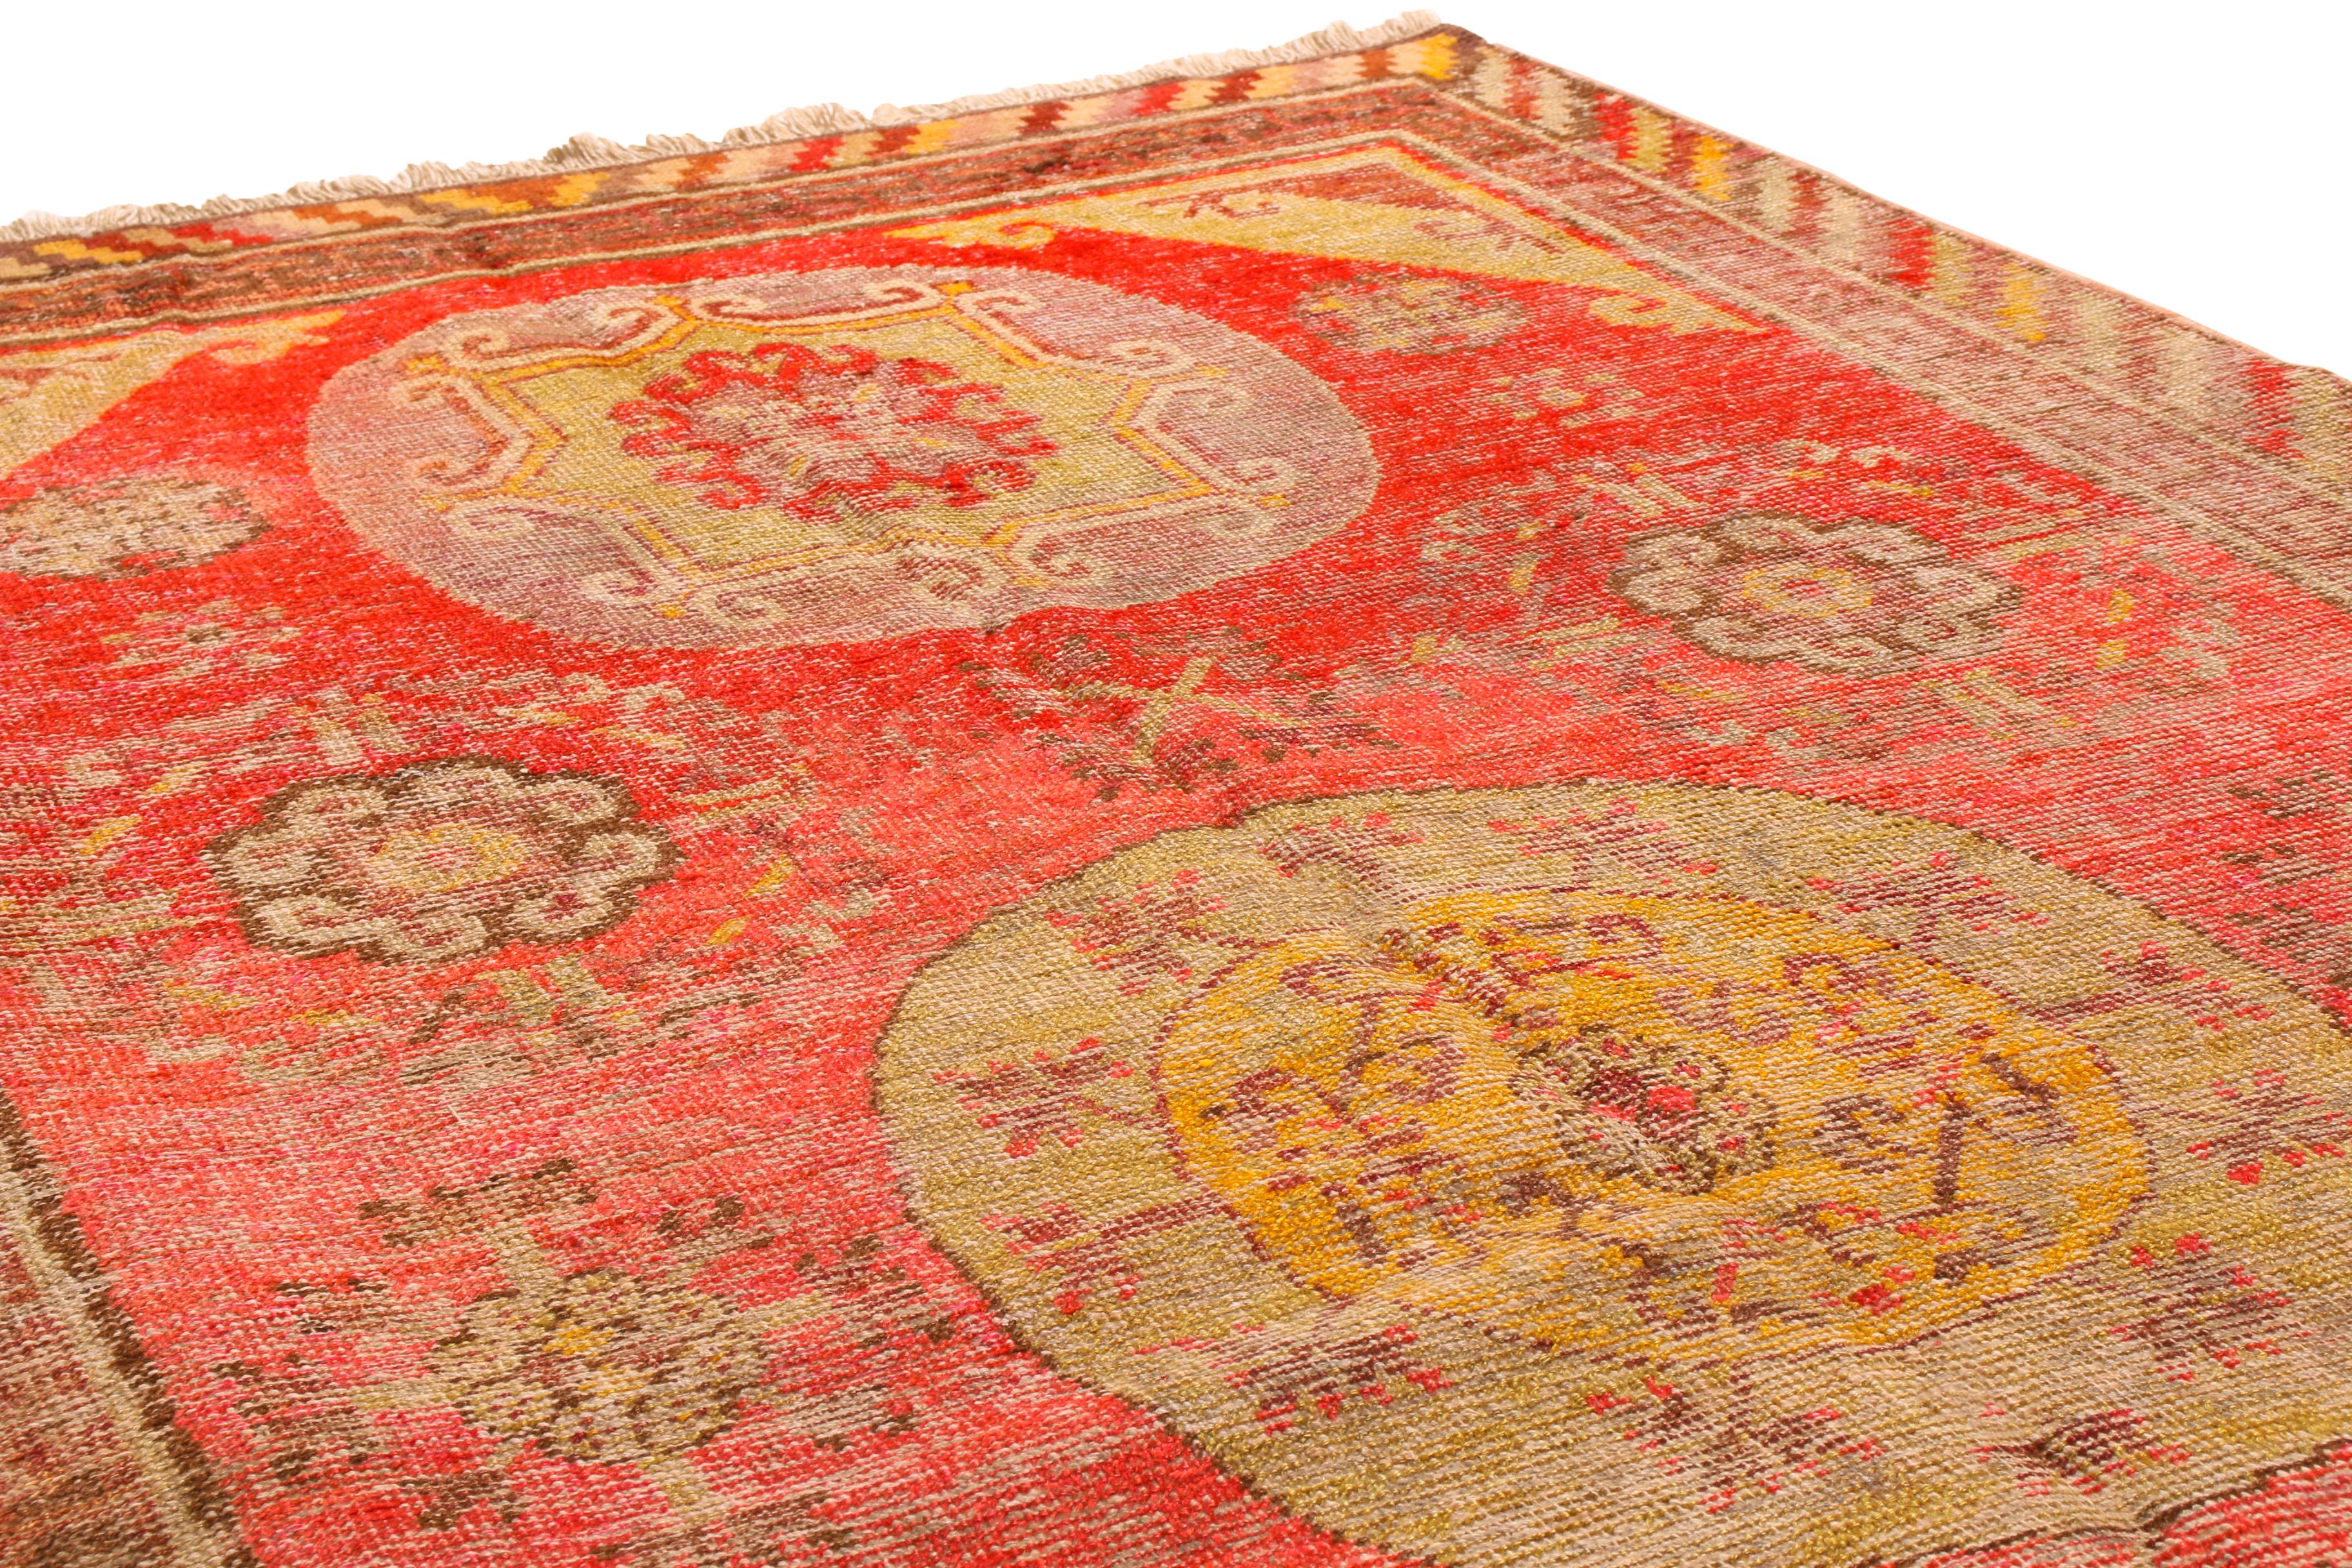 Antique Khotan Traditional Red Wool Rug Medallion Style Floral by Rug & Kilim In Good Condition For Sale In Long Island City, NY